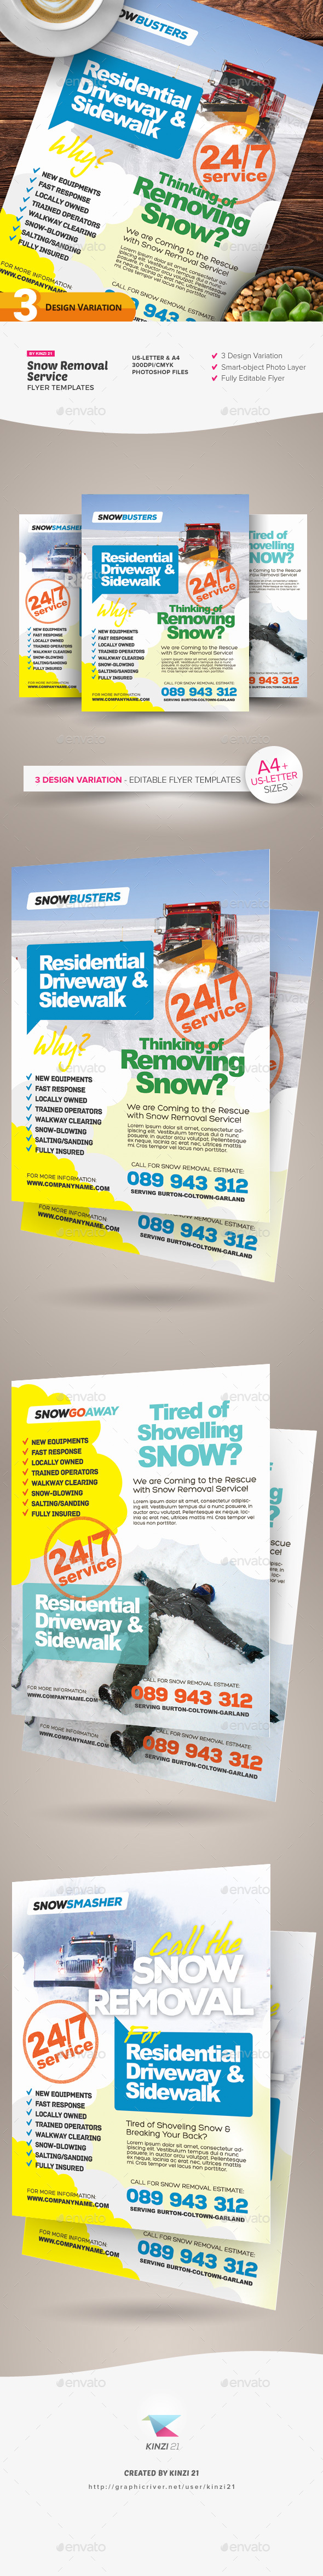 Snow Removal Service Flyers